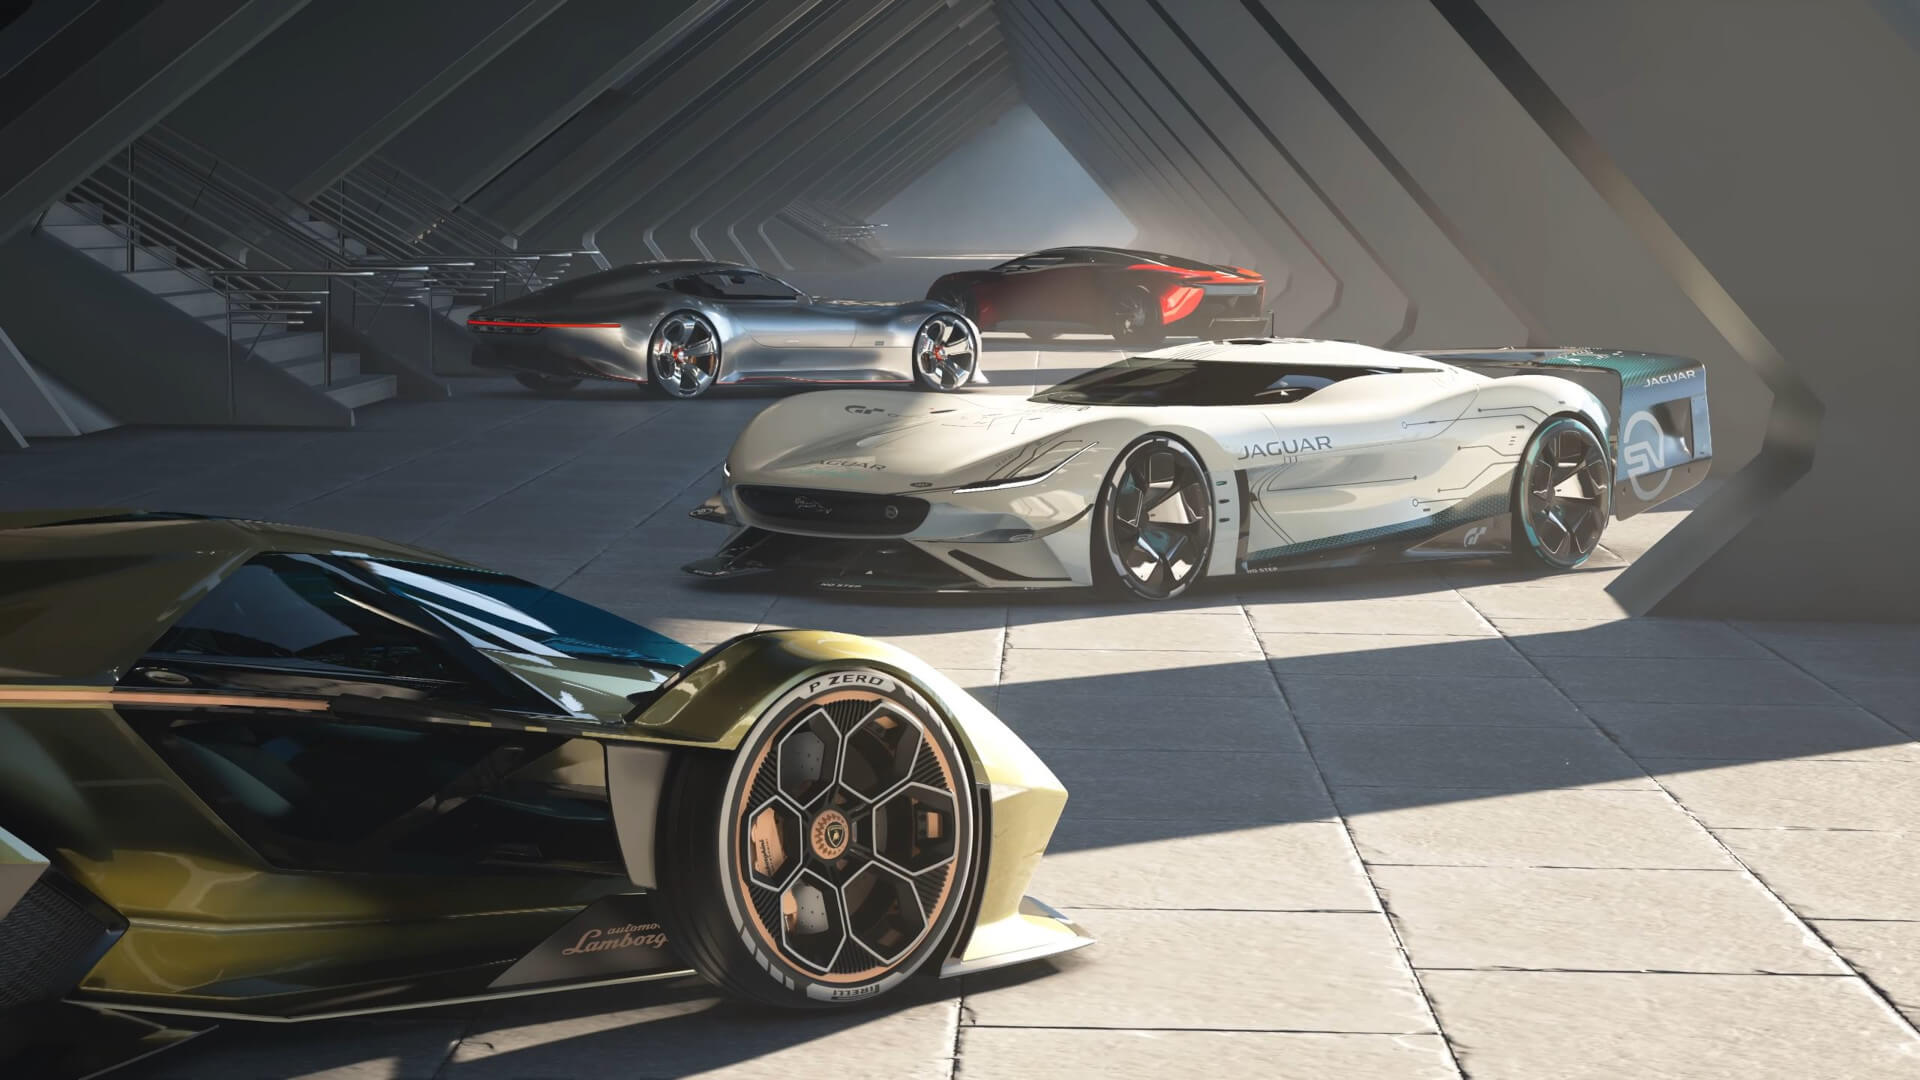 Several high-end cars in Gran Turismo 7